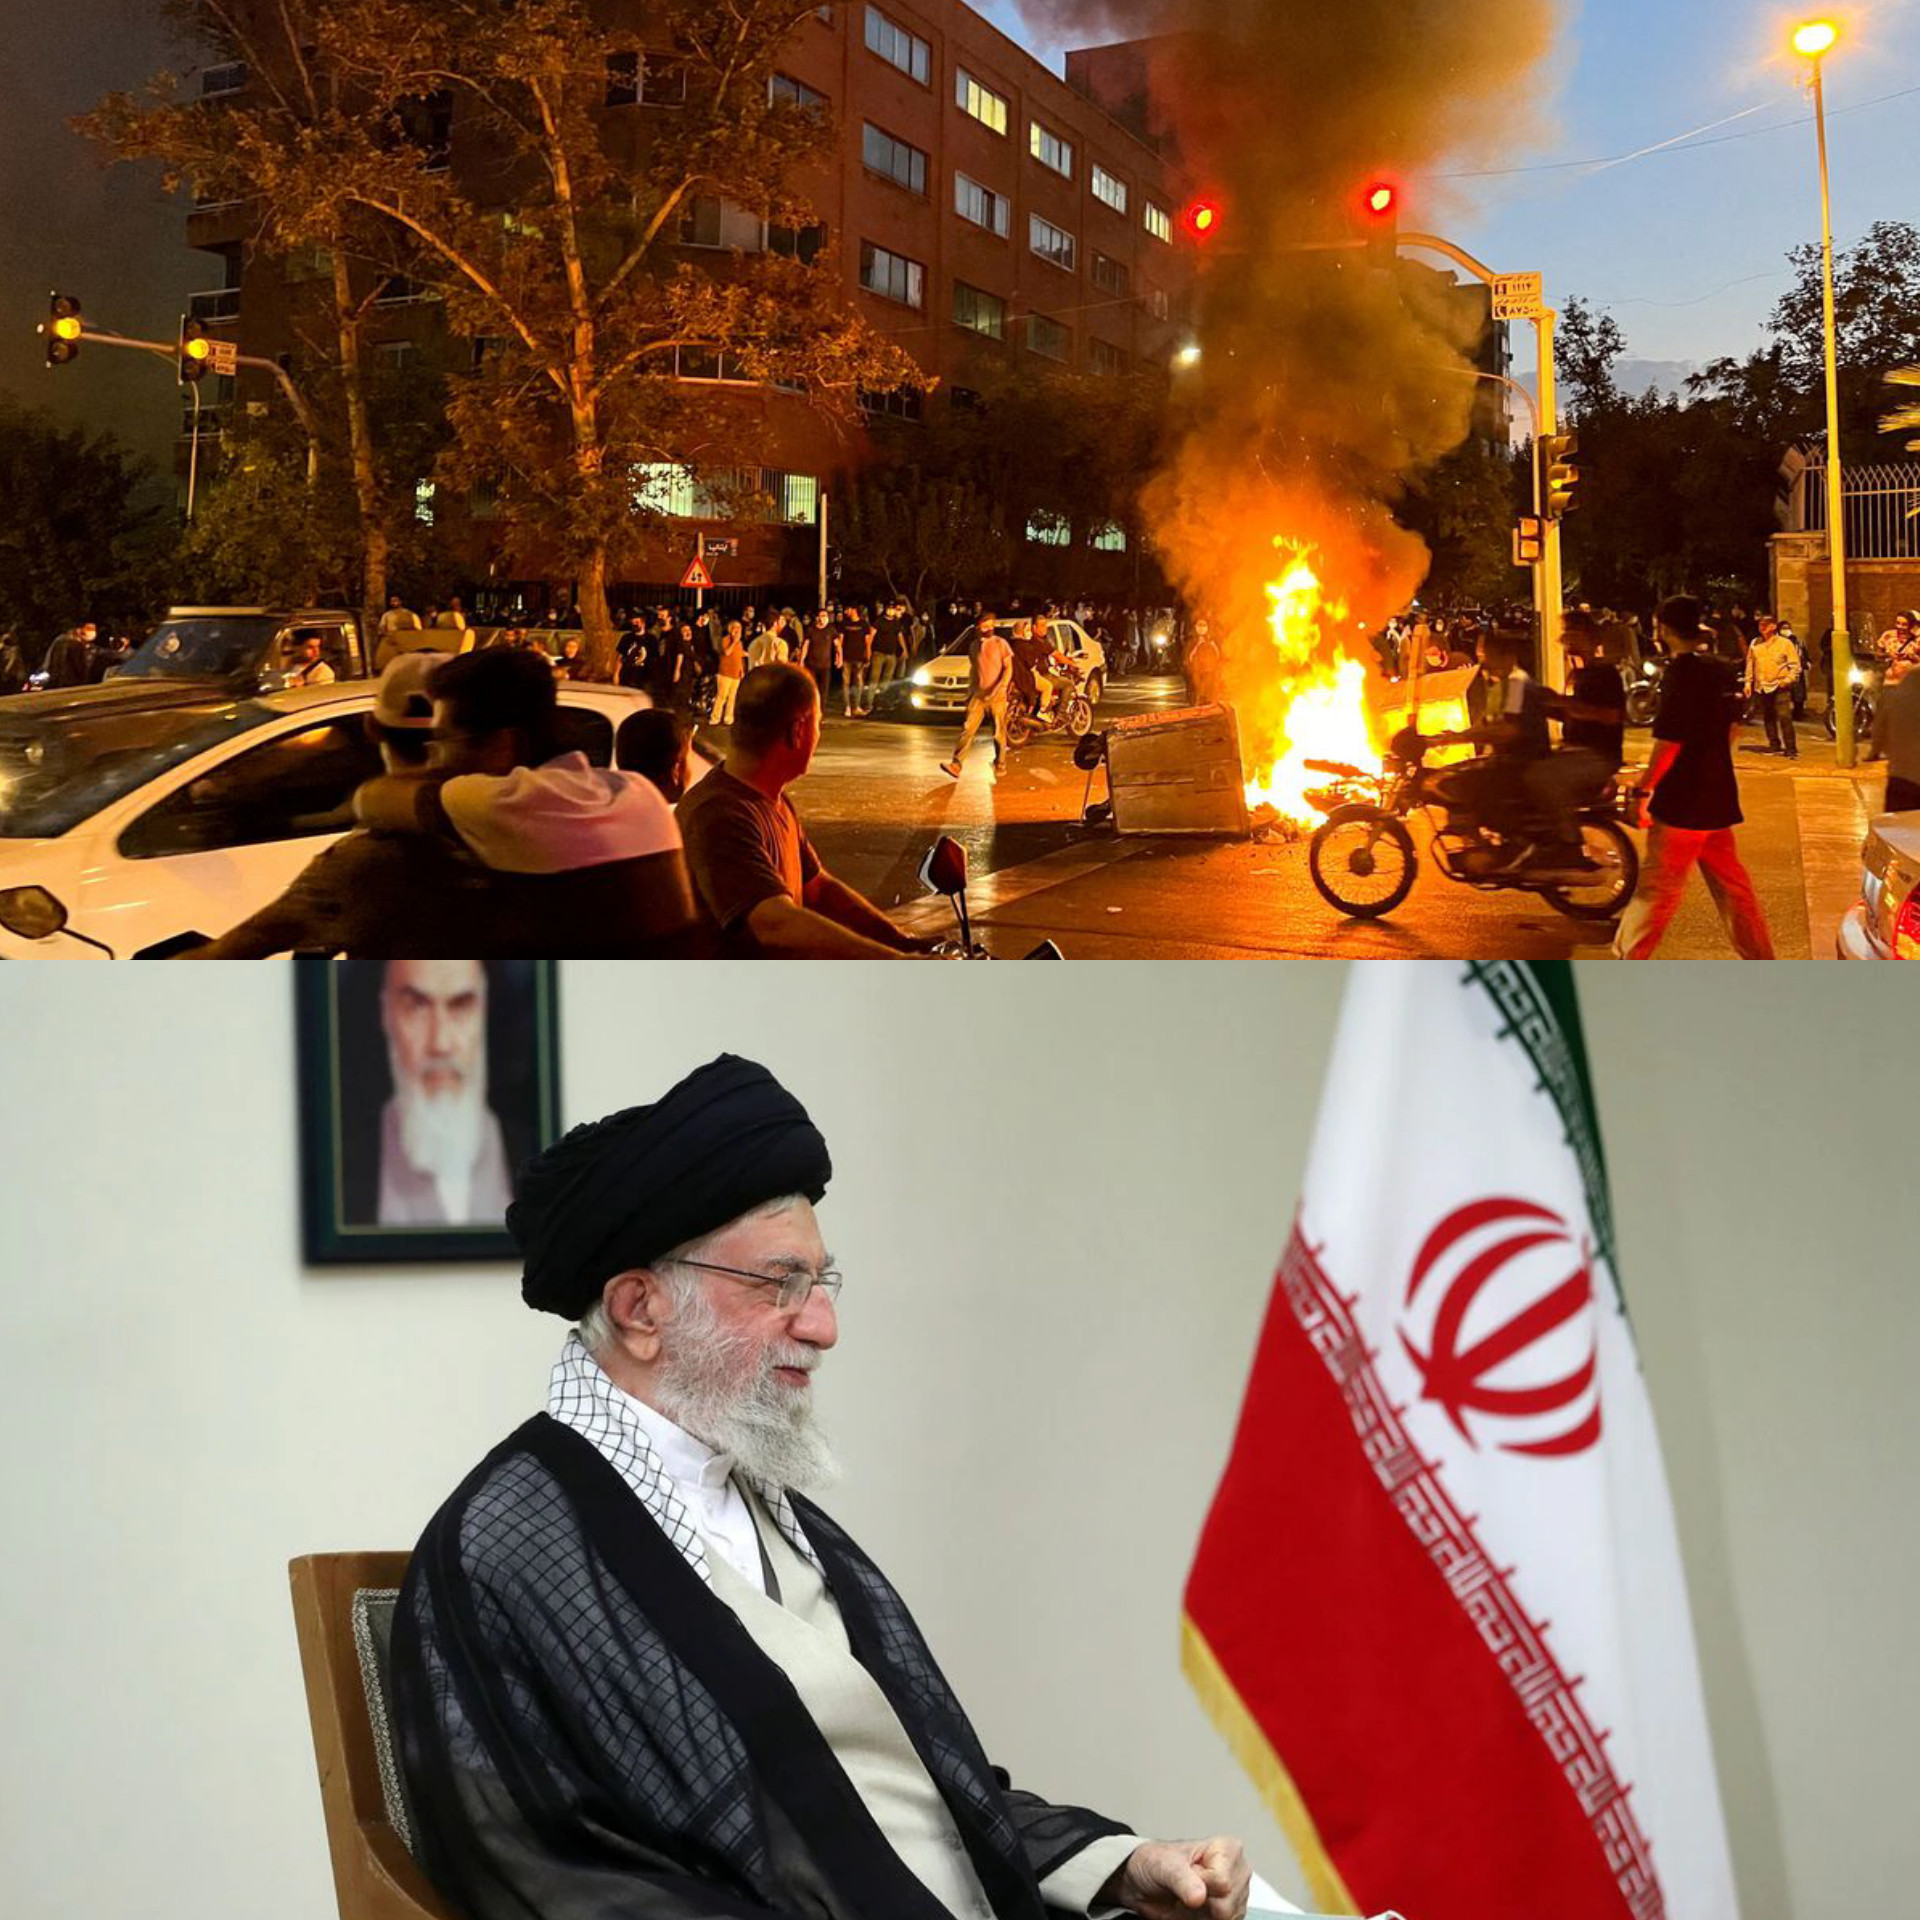 'Some people have burned the Quran, removed hijabs from veiled women' - Iran's supreme leader blames US and Israel for two weeks protests over 22-year-old Amini's death